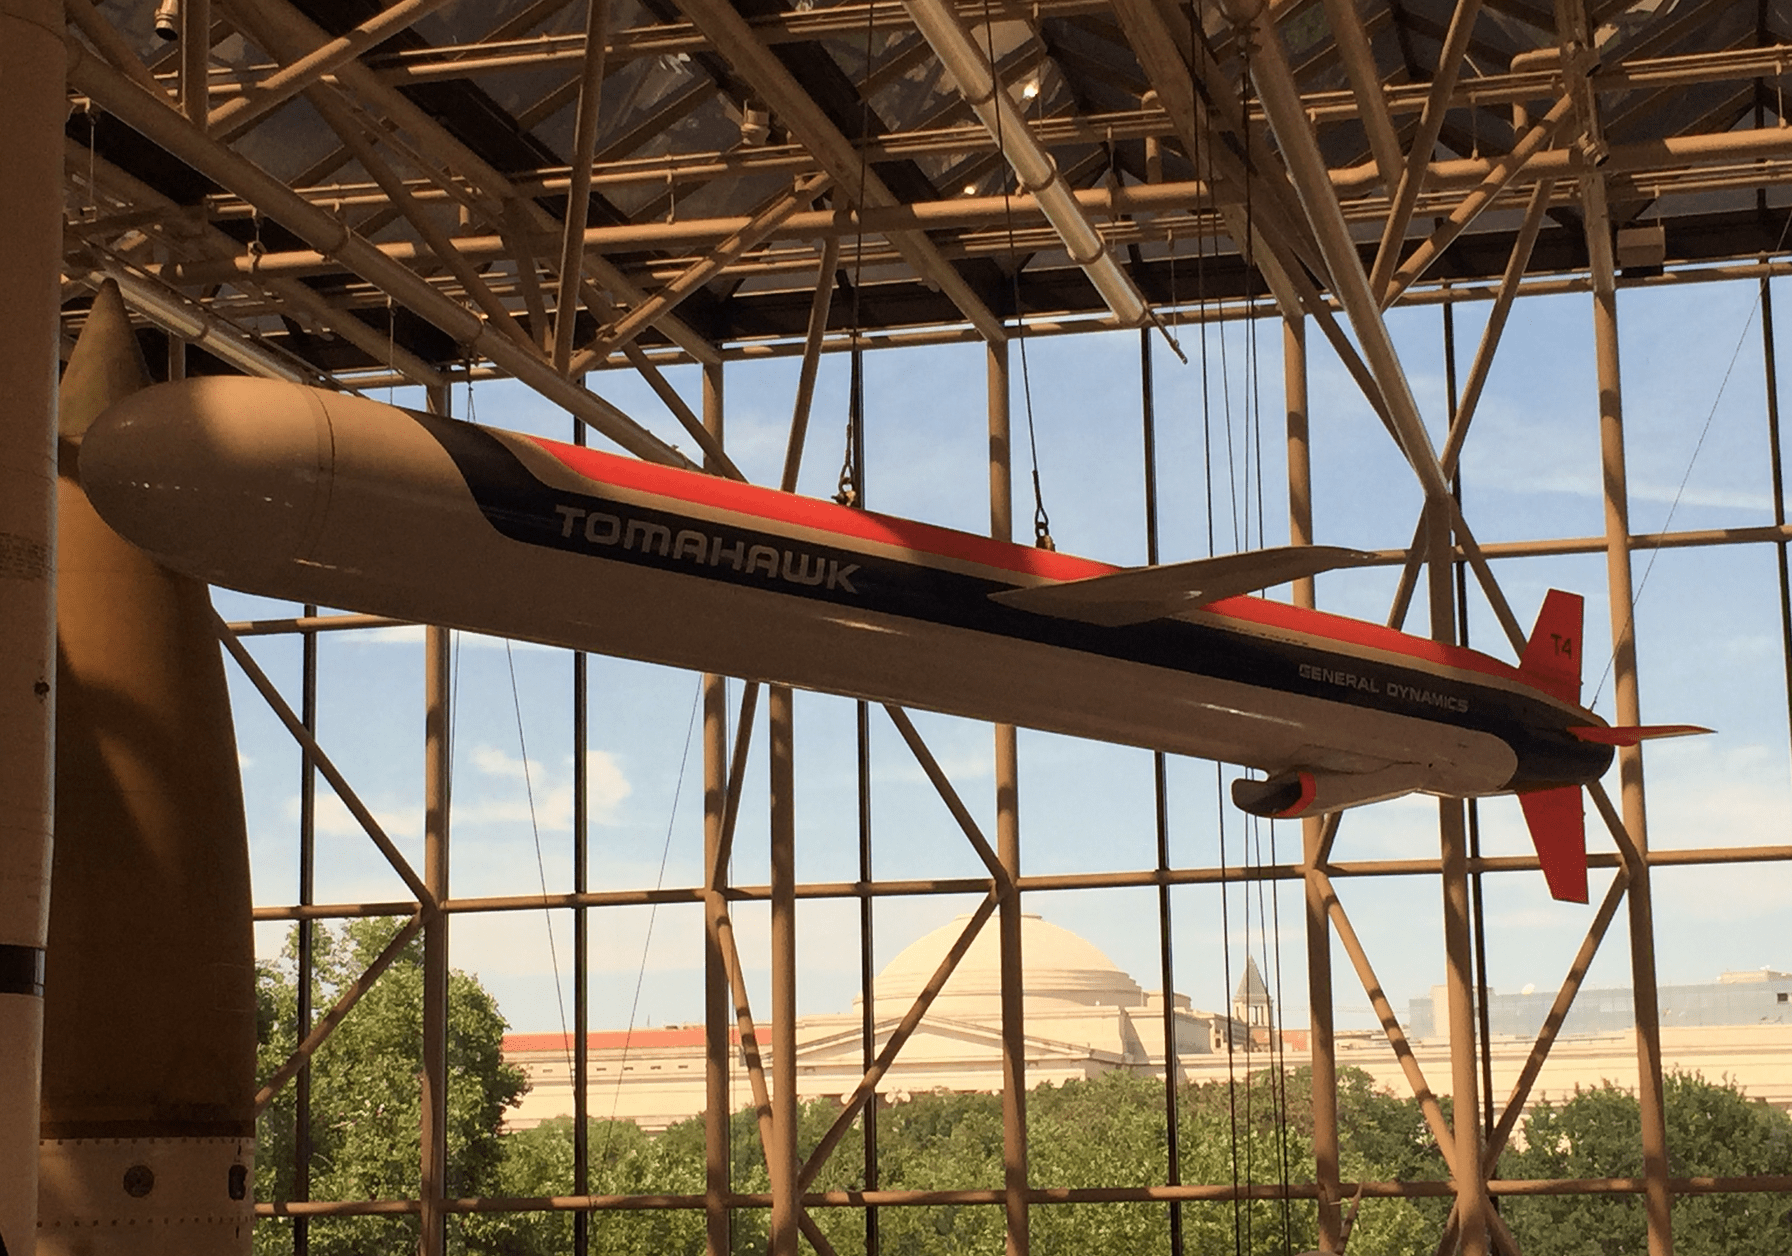 a tomahawk cruise missile on display